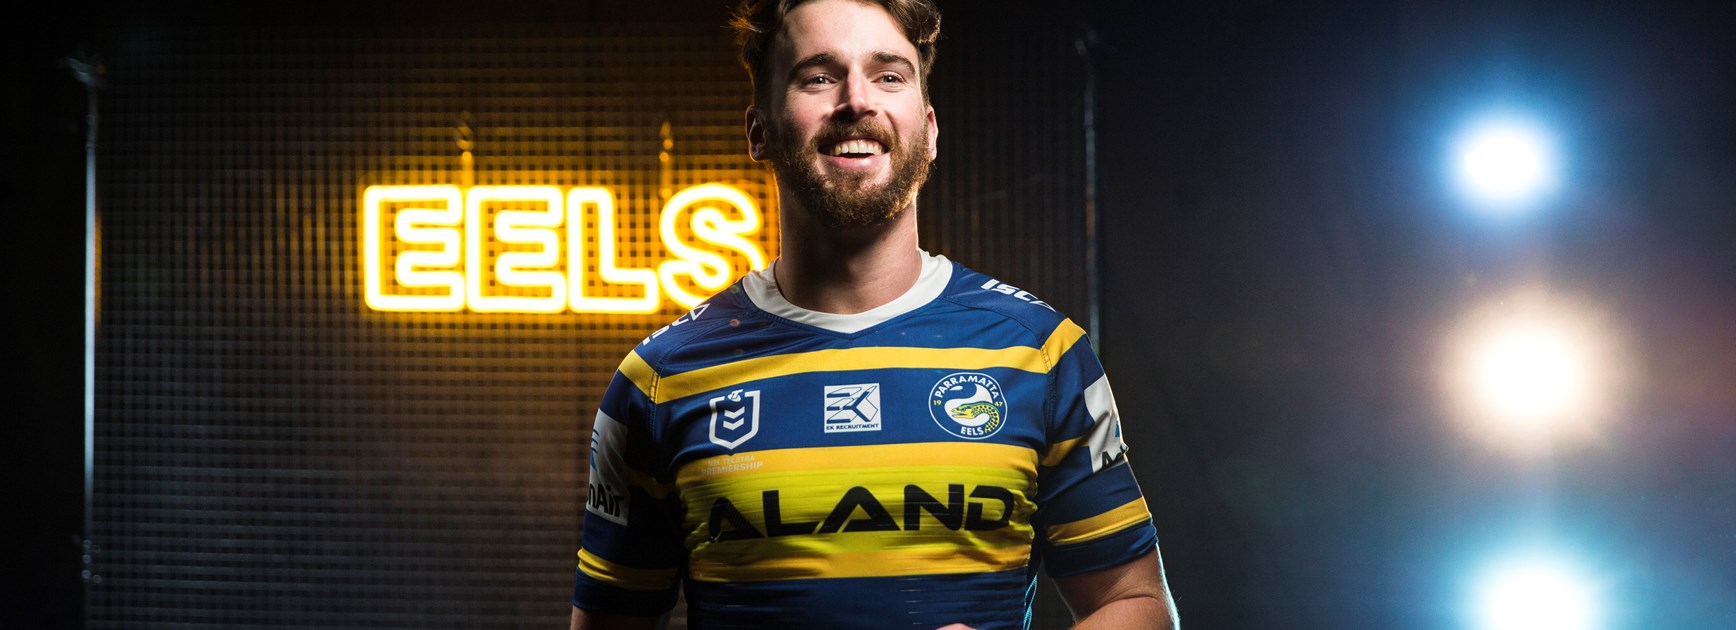 Eels re-sign Clint Gutherson